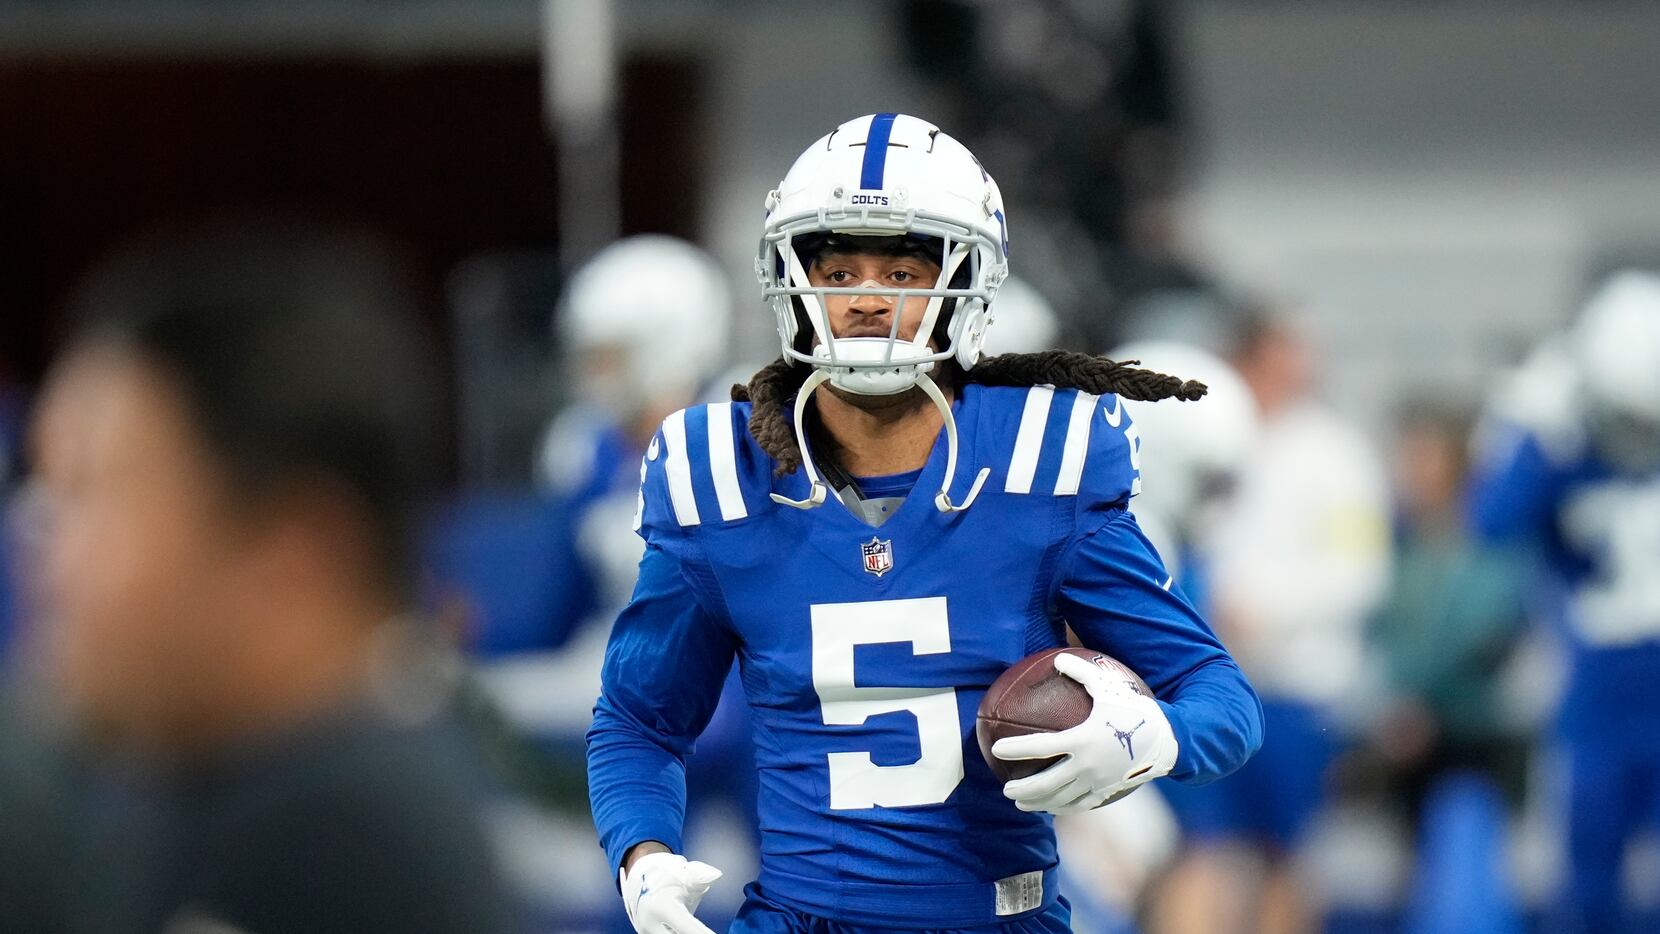 Dallas Cowboys acquire All-Pro CB Stephon Gilmore from Indianapolis Colts